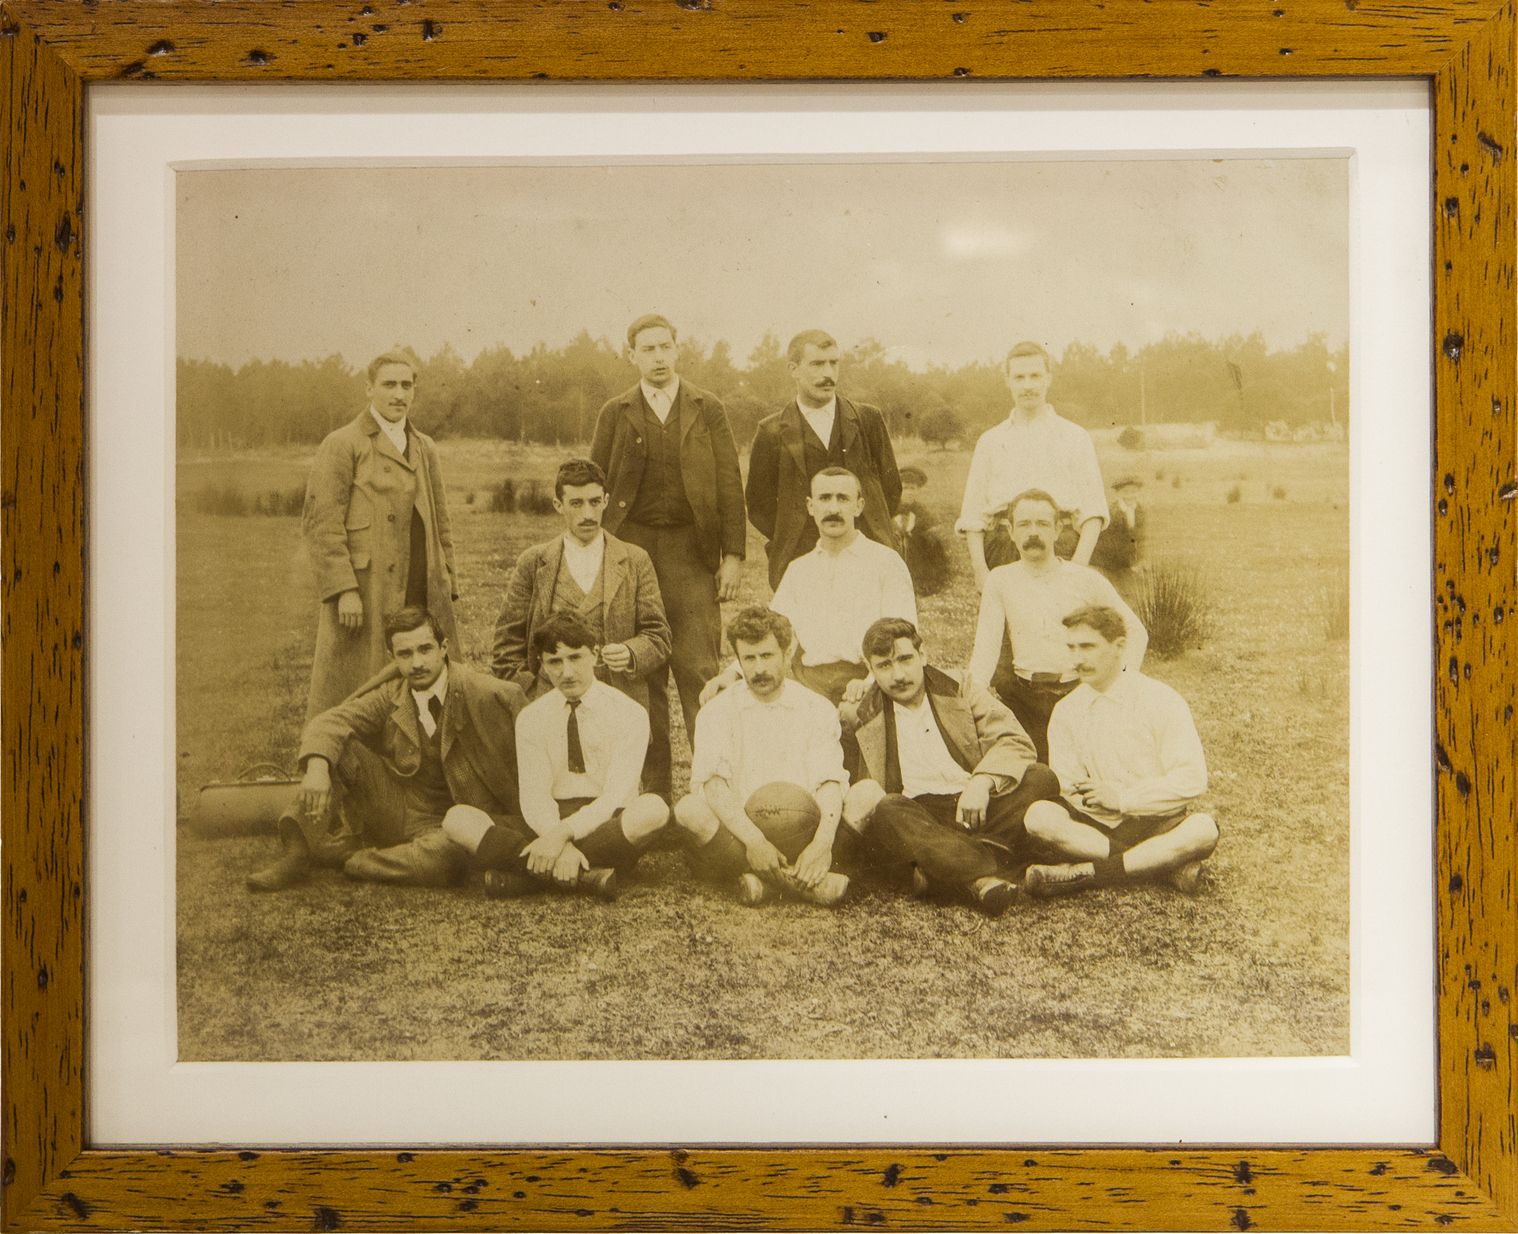 Photo of an Athletic Club starting XI from 1903-04 containing many of the founding members